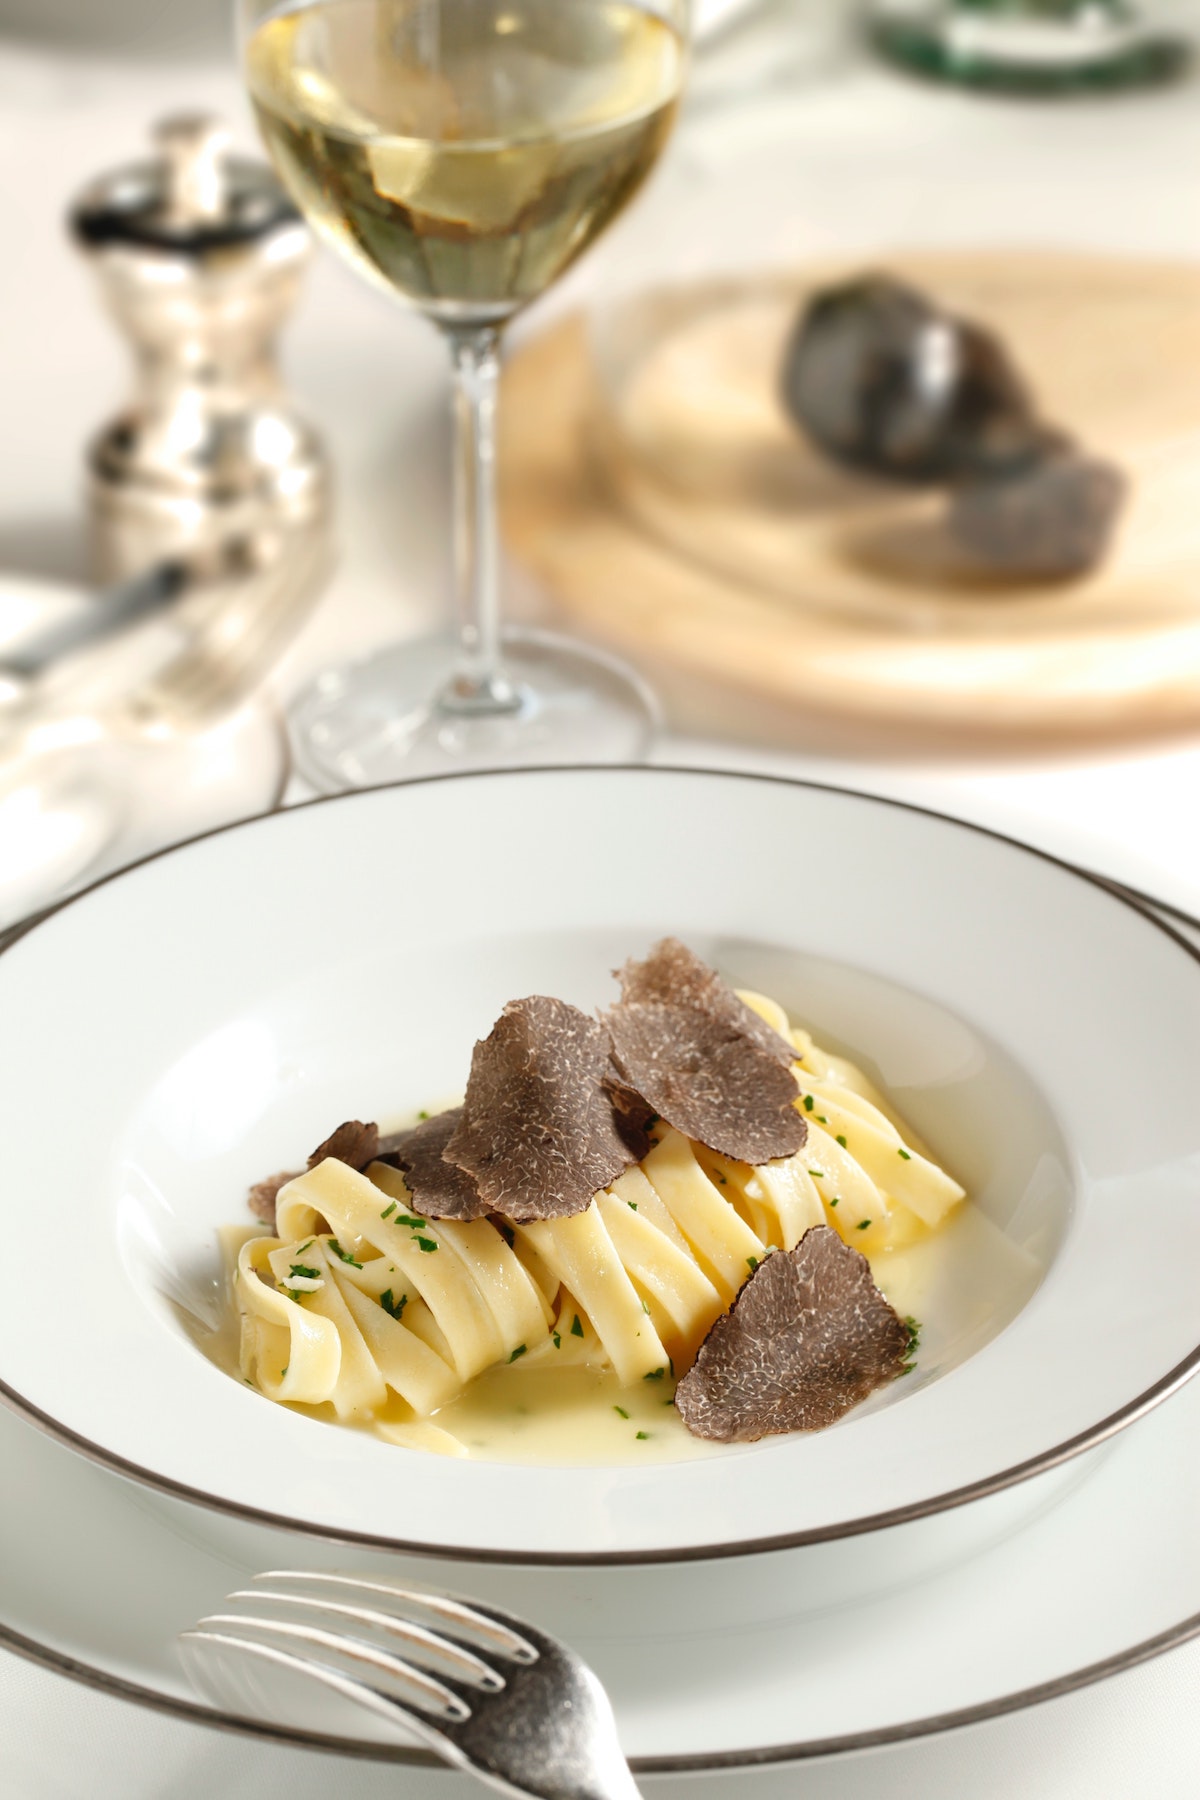 Pasta dish made with wide, flat noodles and topped with truffle shavings on a table beside a glass of white wine.